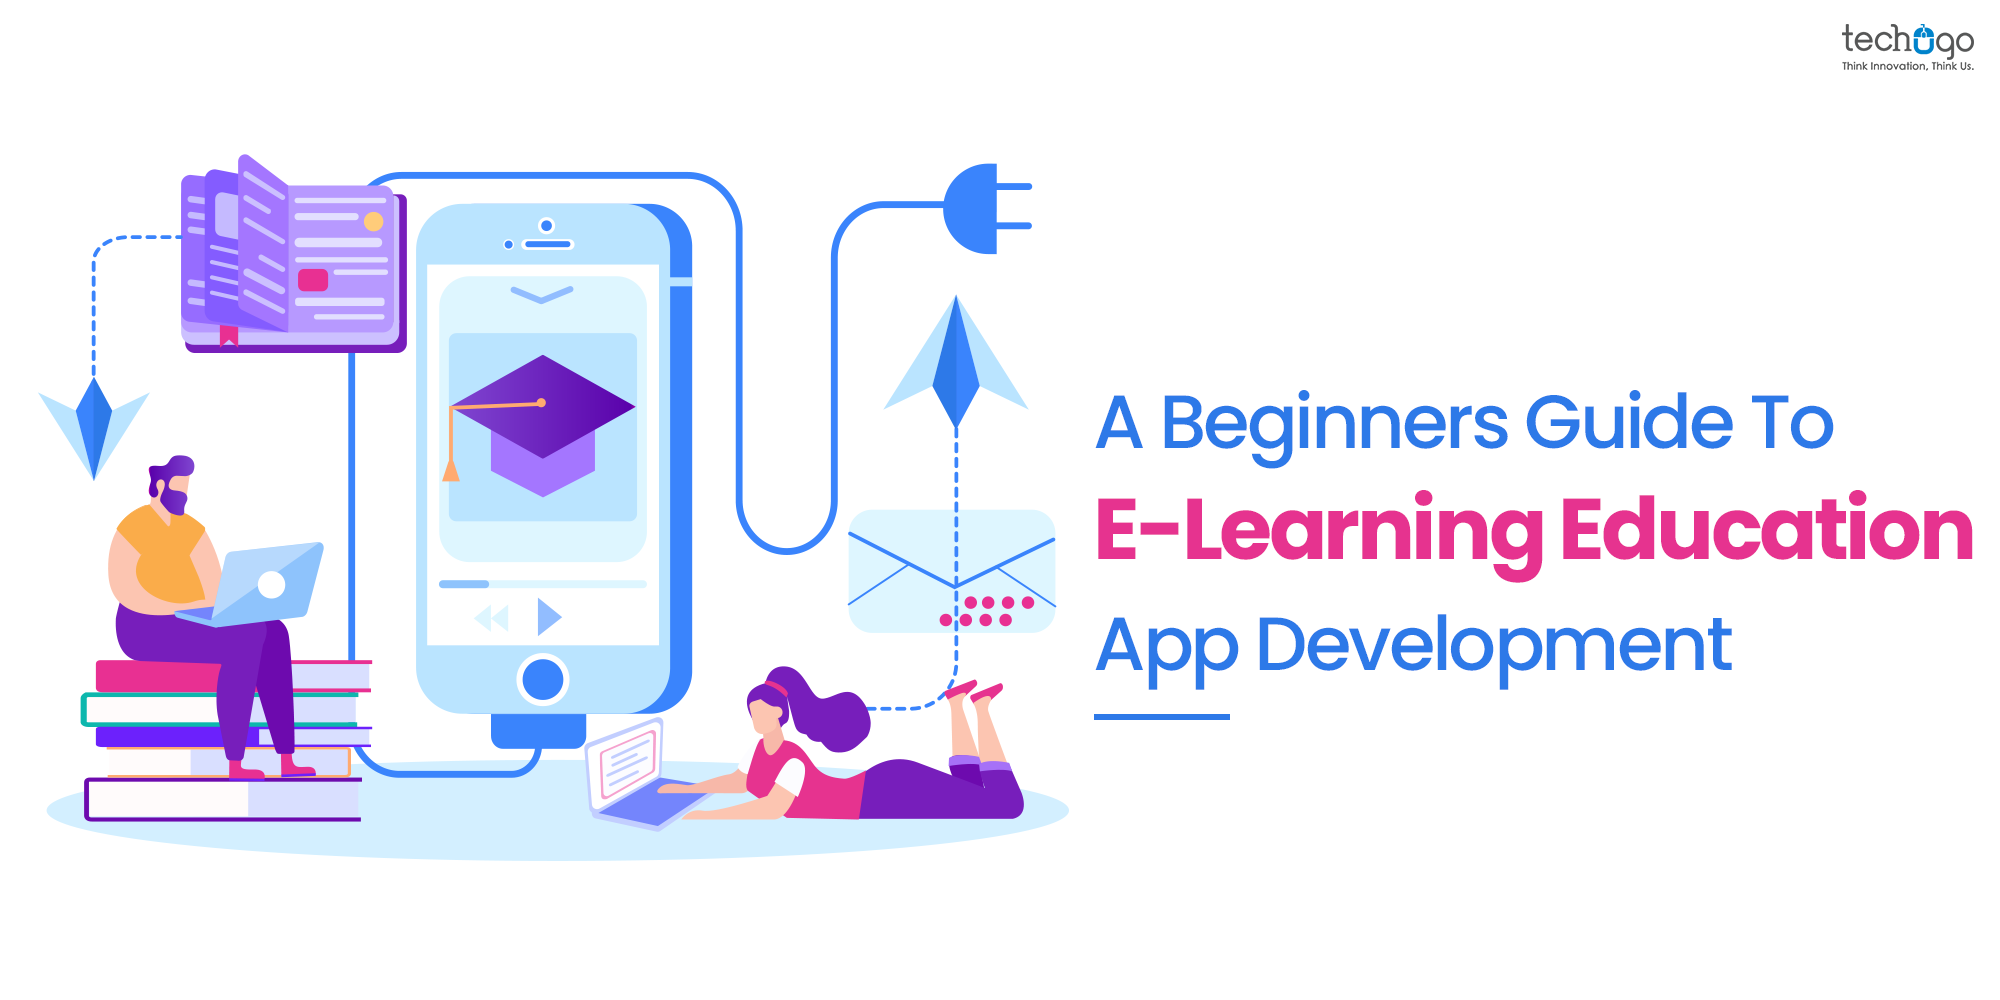 A Beginners Guide To E-Learning Education App Development